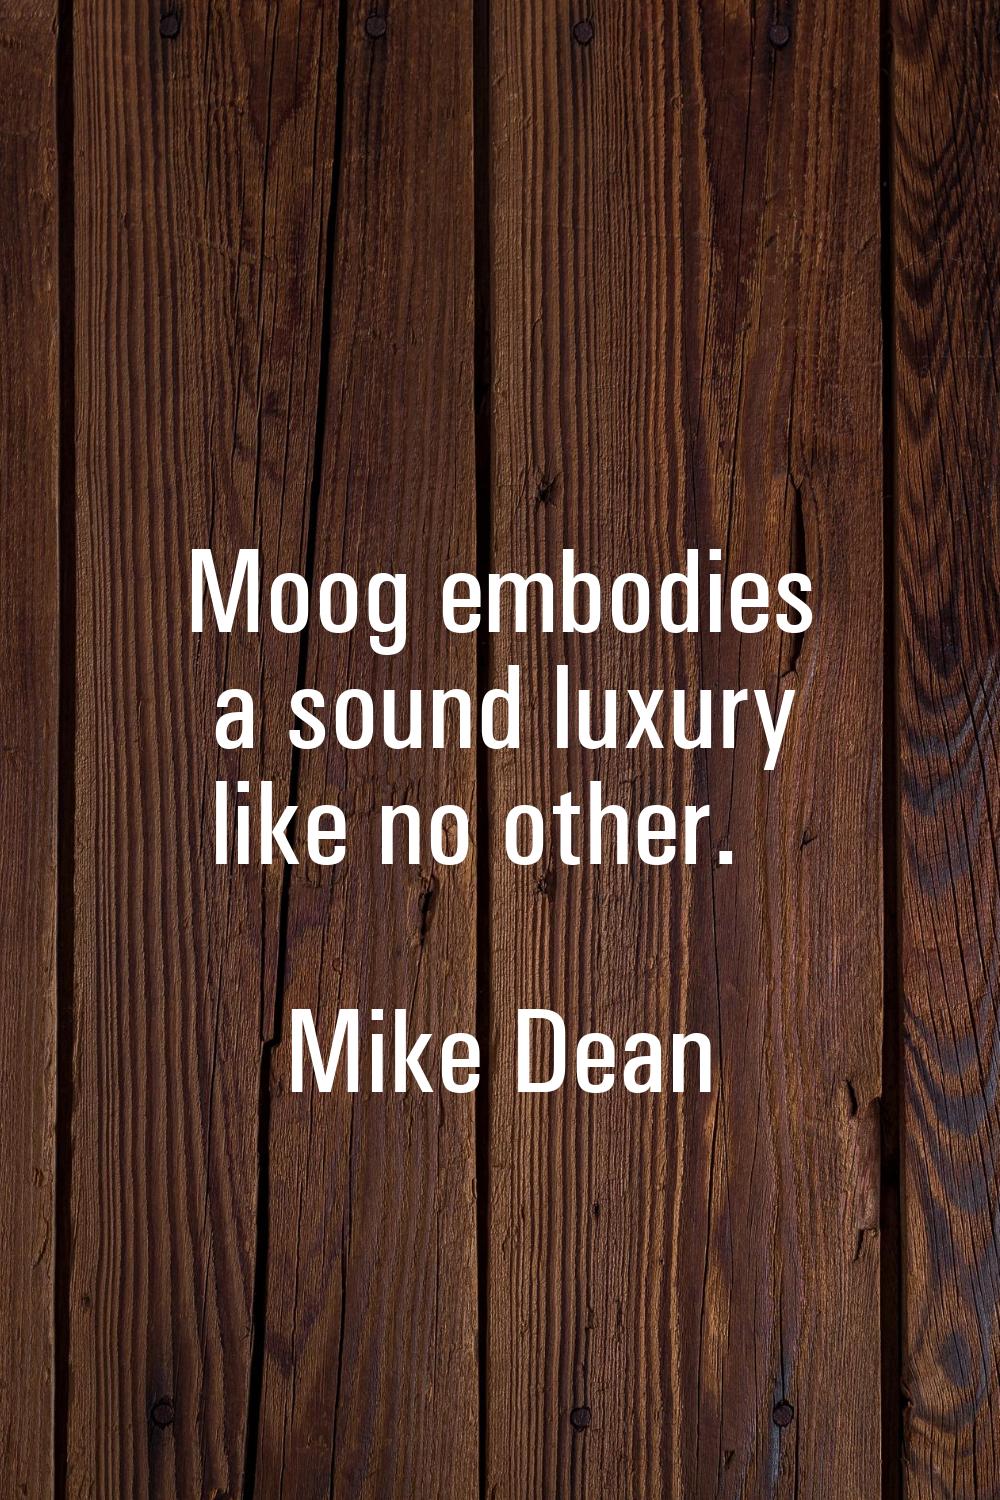 Moog embodies a sound luxury like no other.